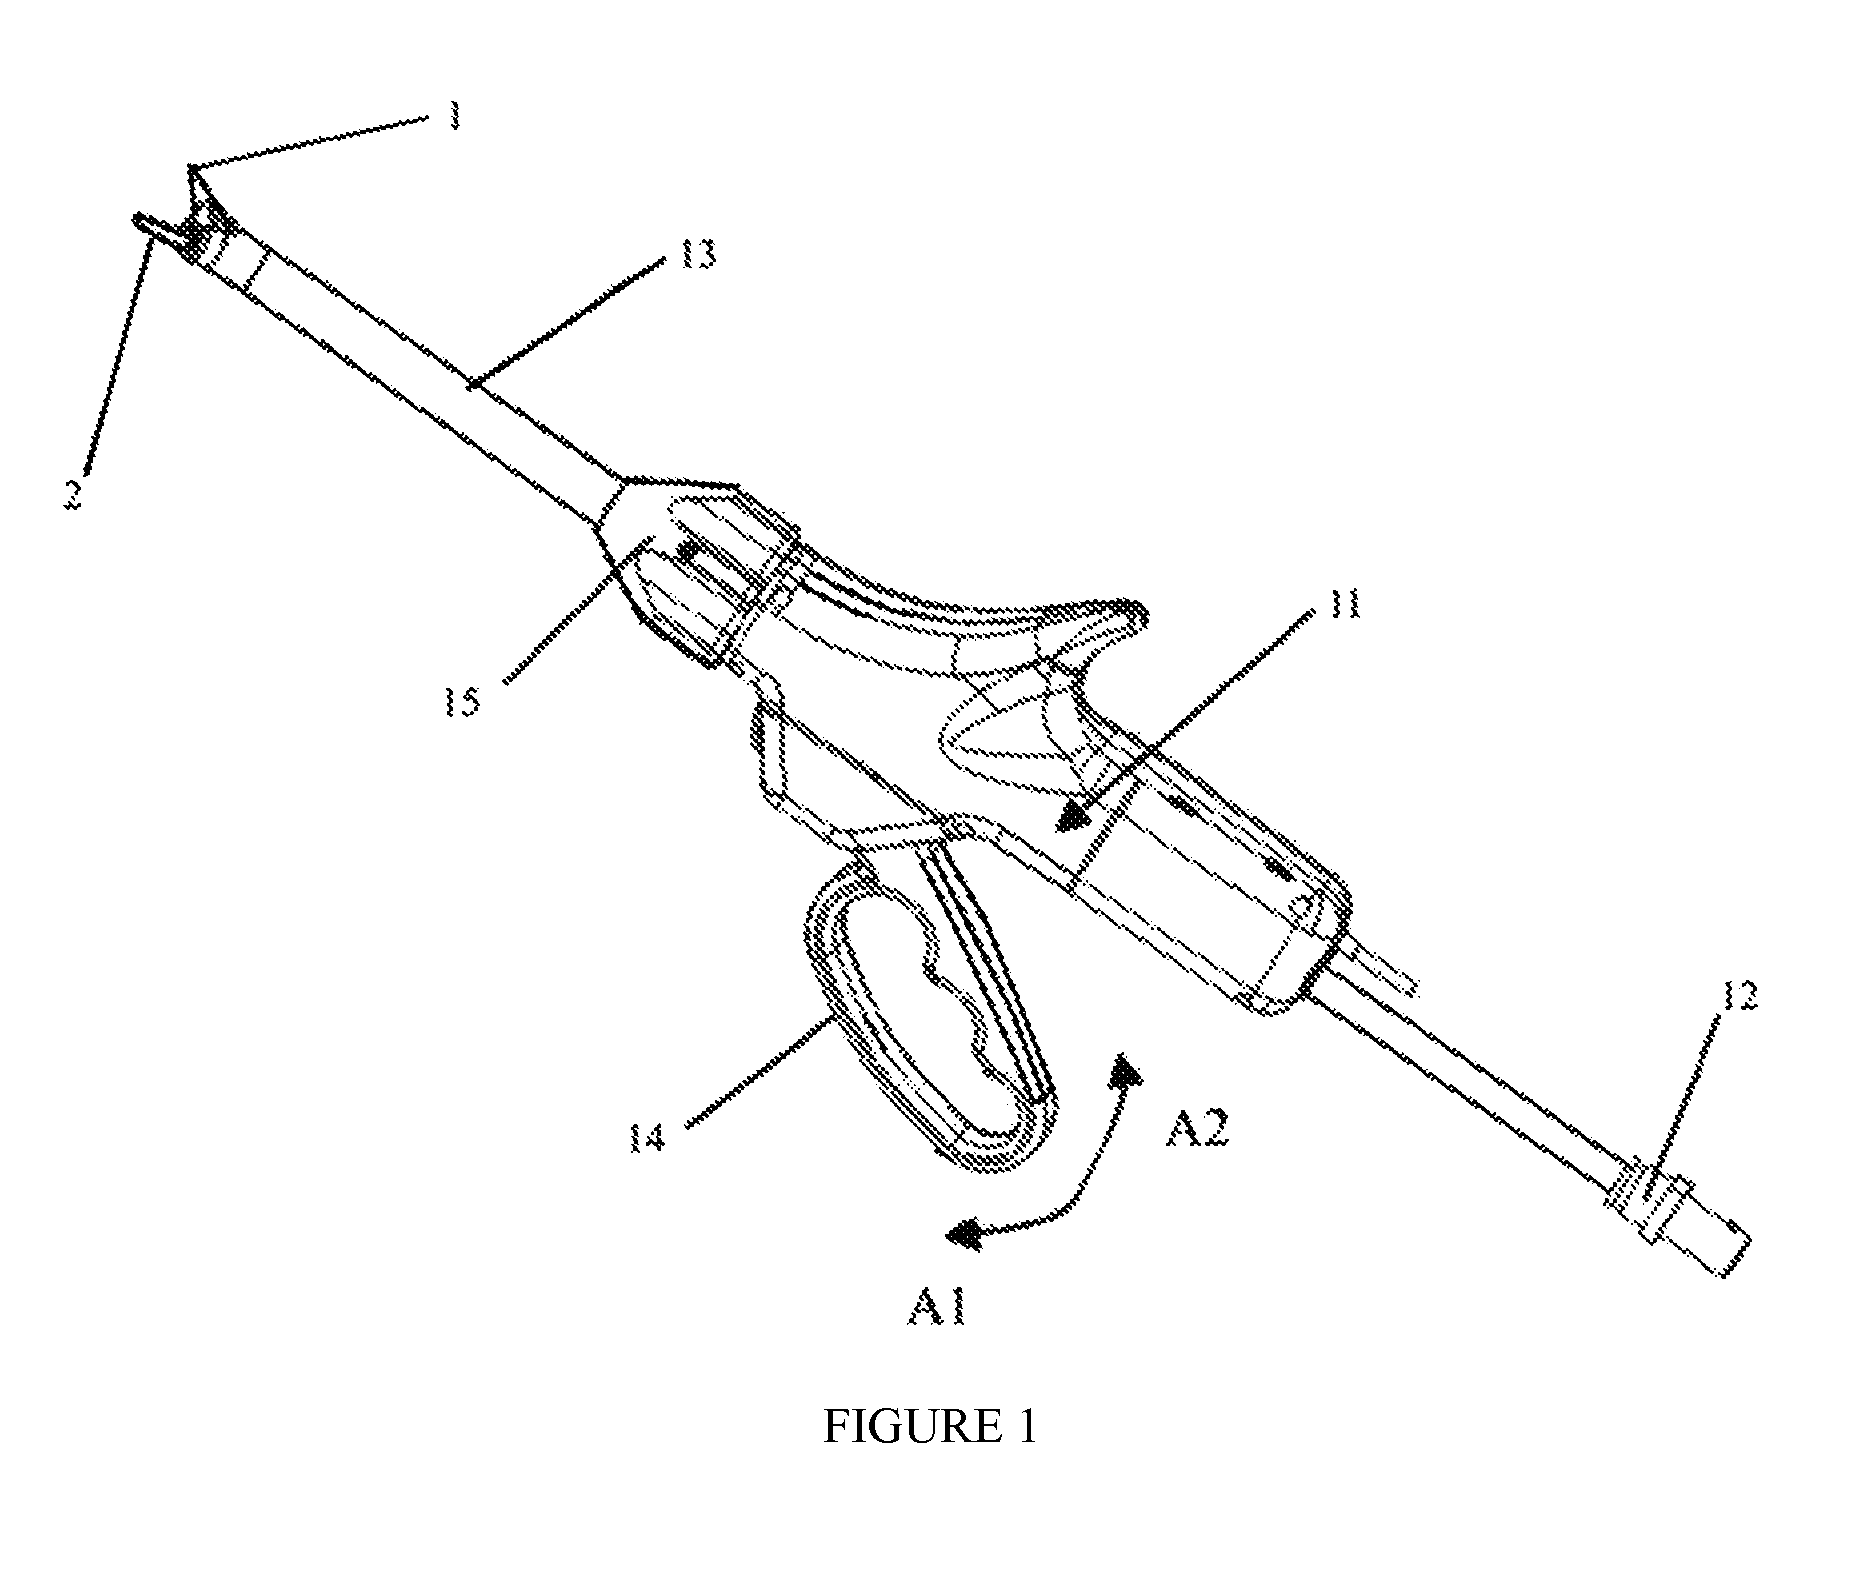 Medical treatment device for holding, coagulating, and cutting living tissue